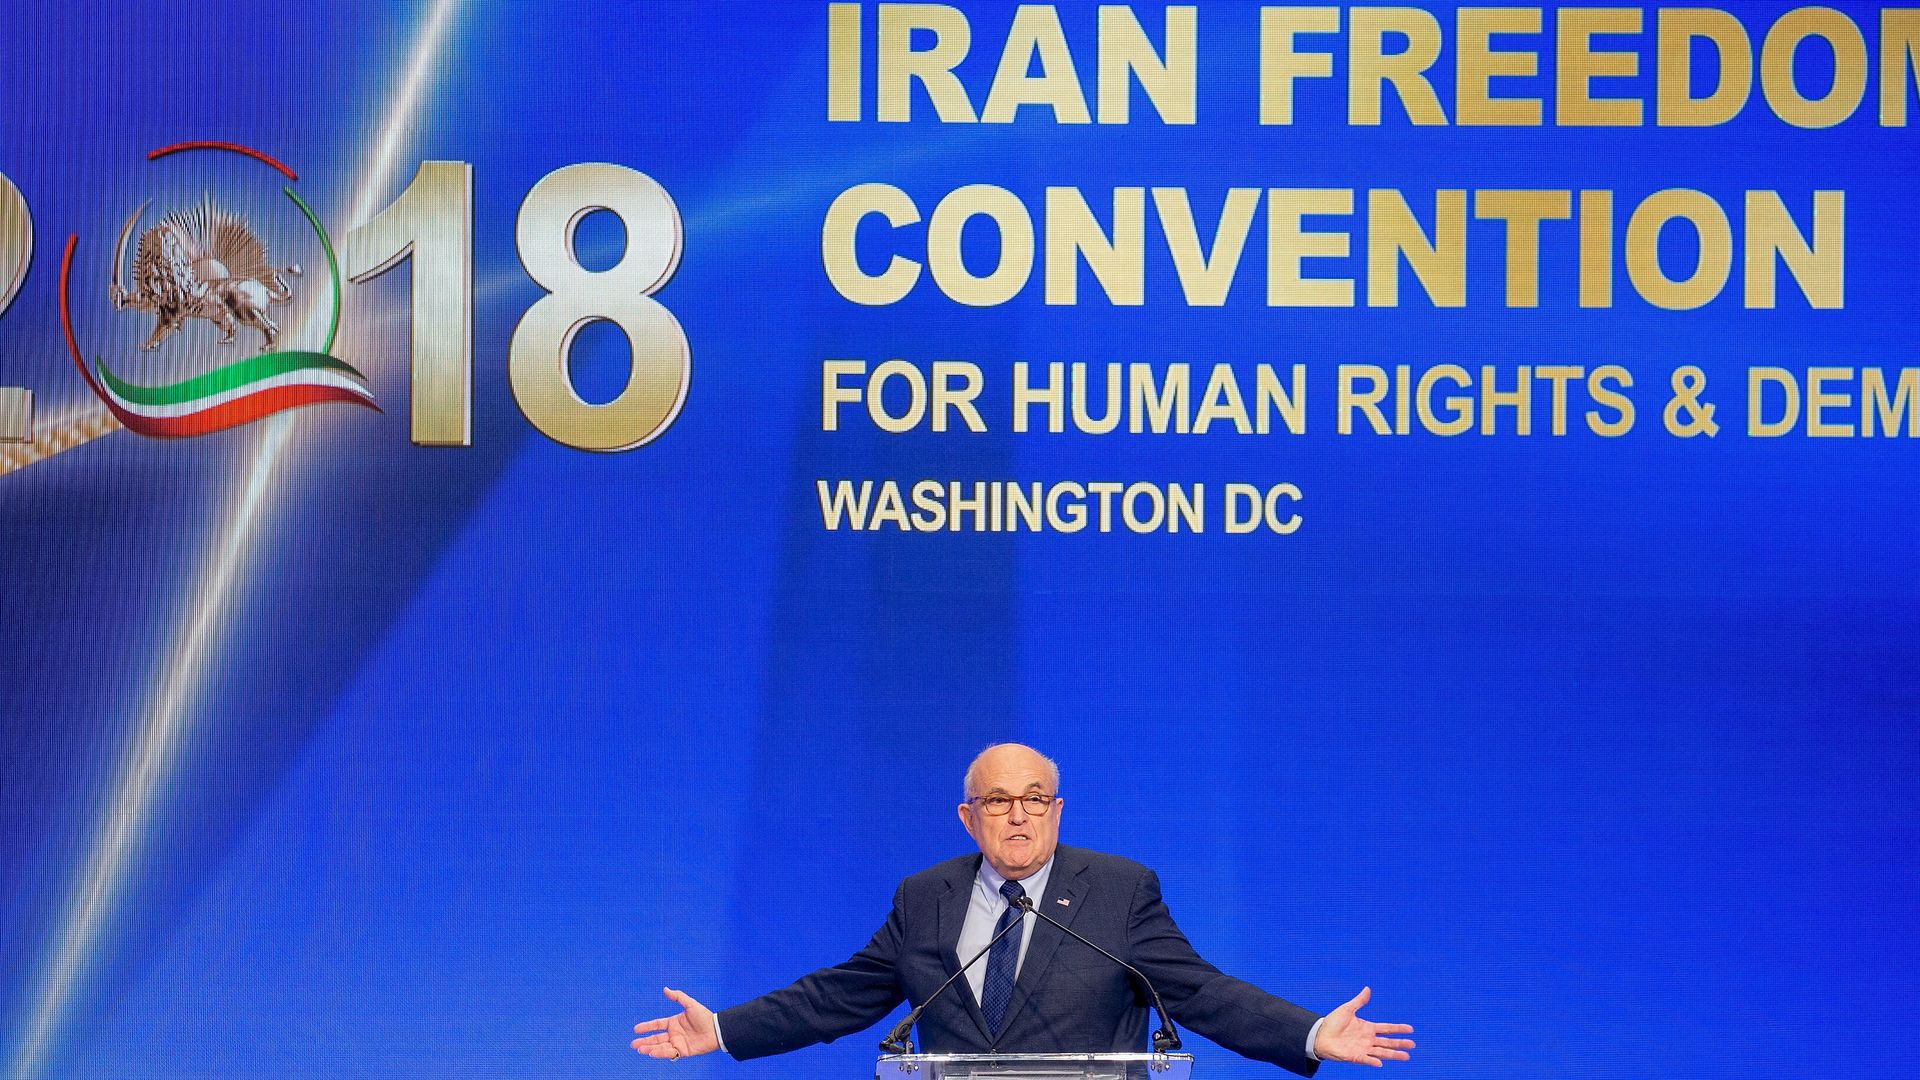 Rudy Giuliani speaks at the Conference on Iran on May 5, 2018 in Washington, DC.